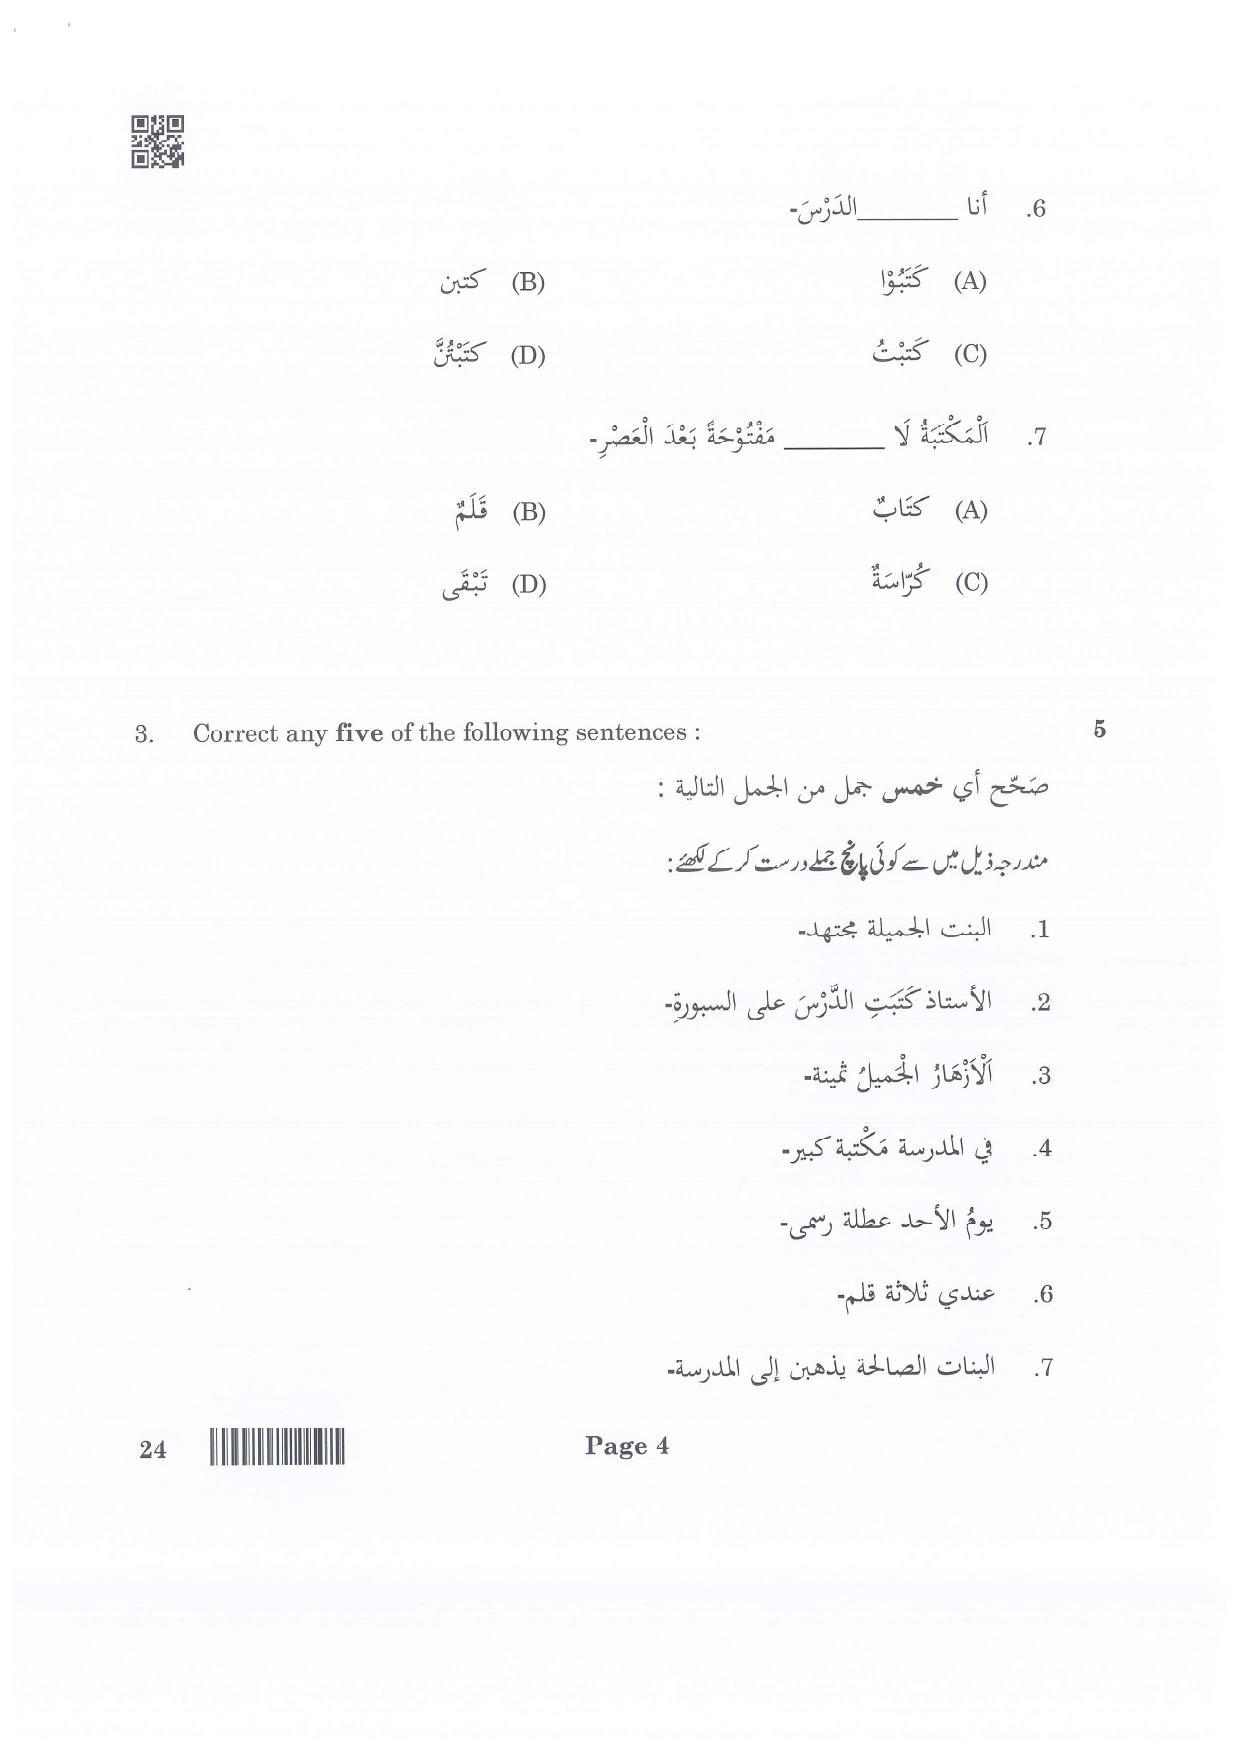 CBSE Class 10 24_Arabic 2022 Question Paper - Page 4